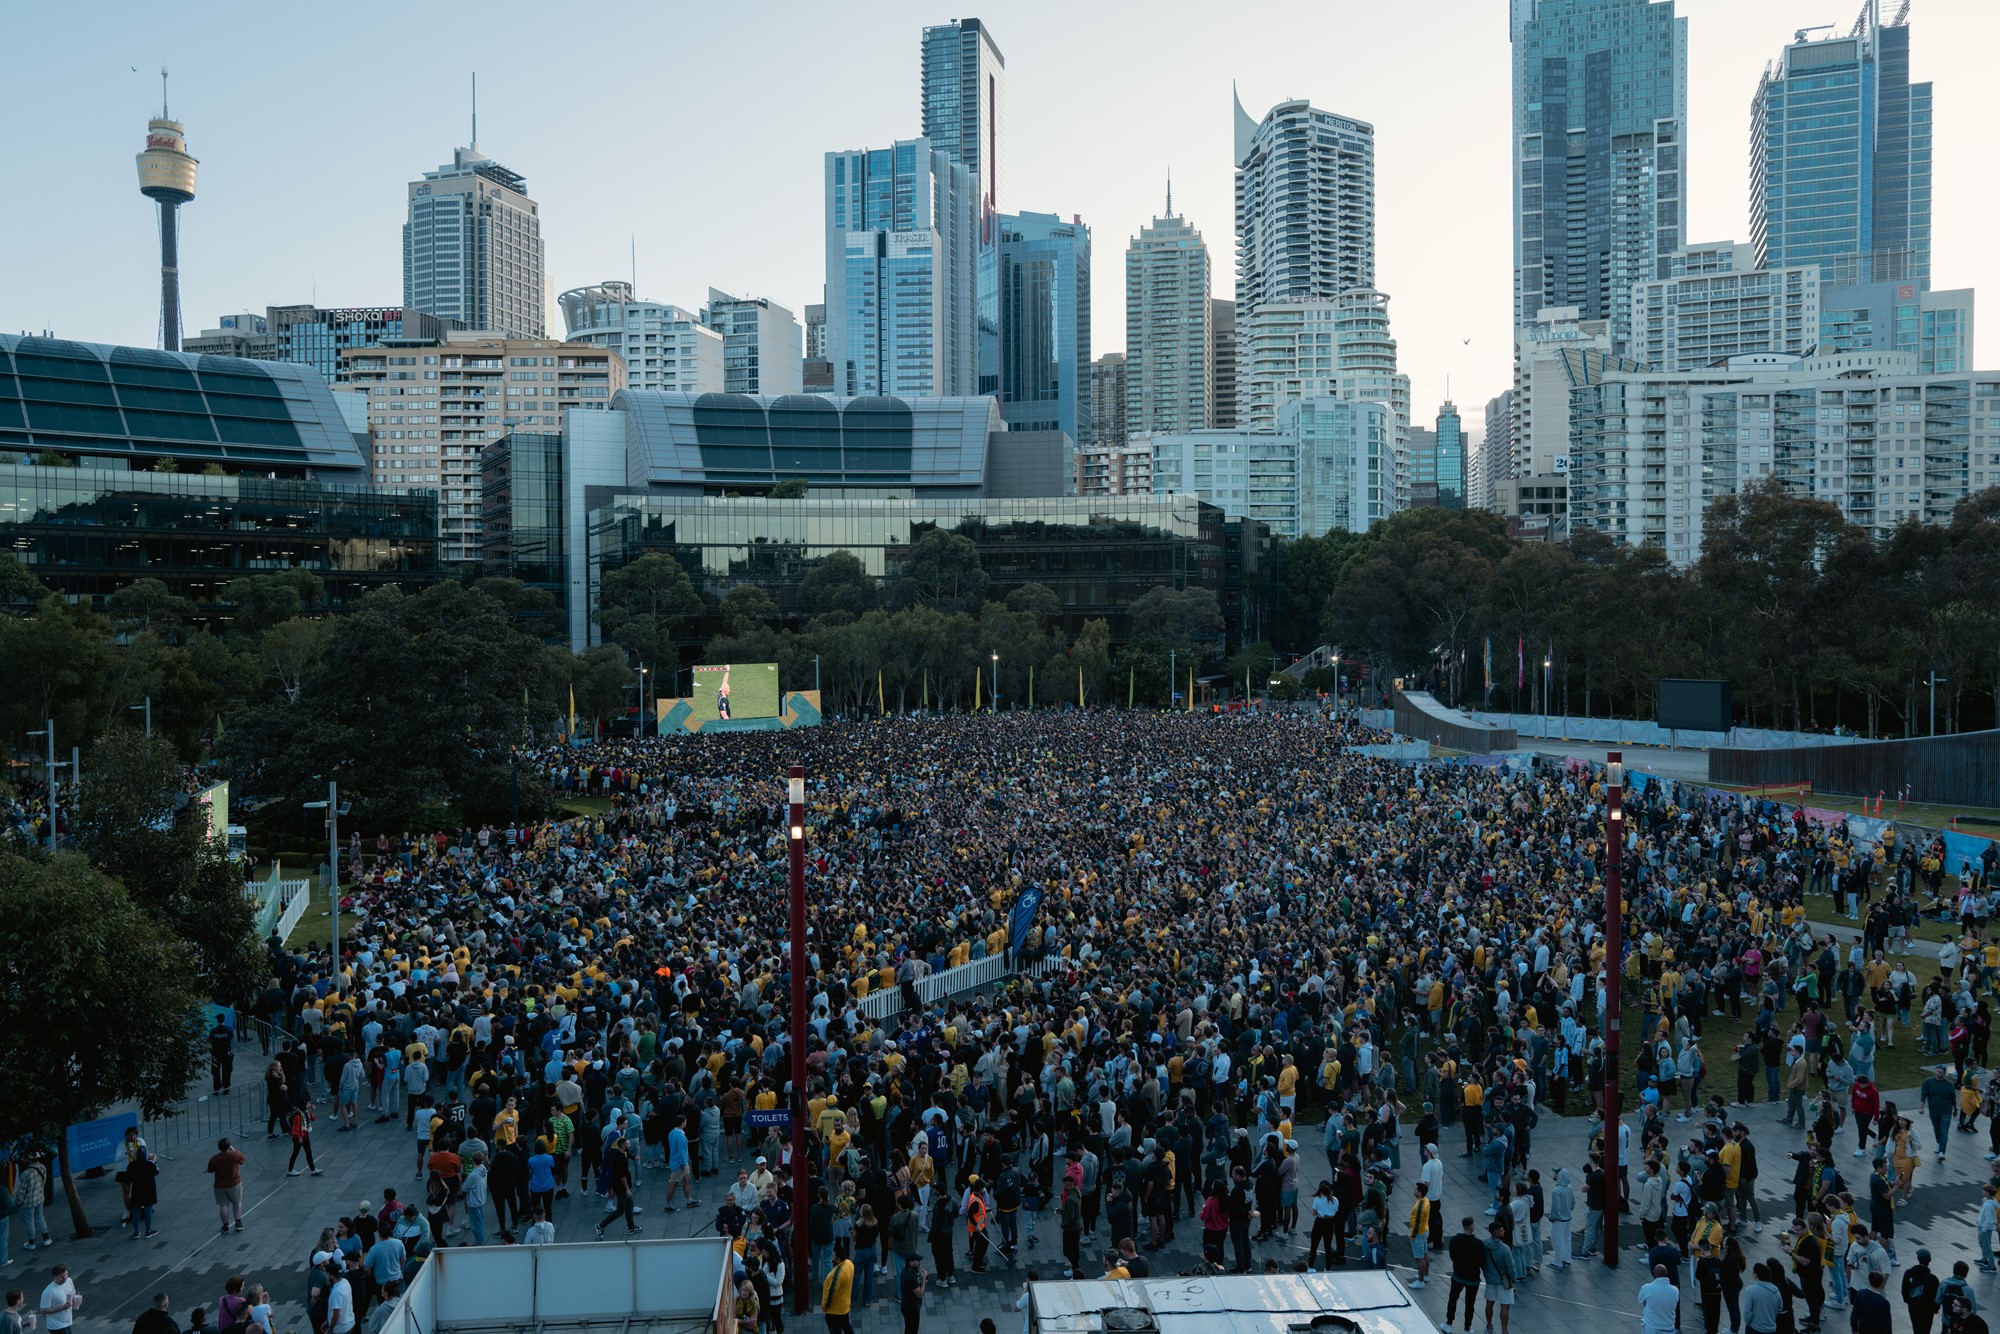 Socceroos fans watch the big game at a live site in Sydney